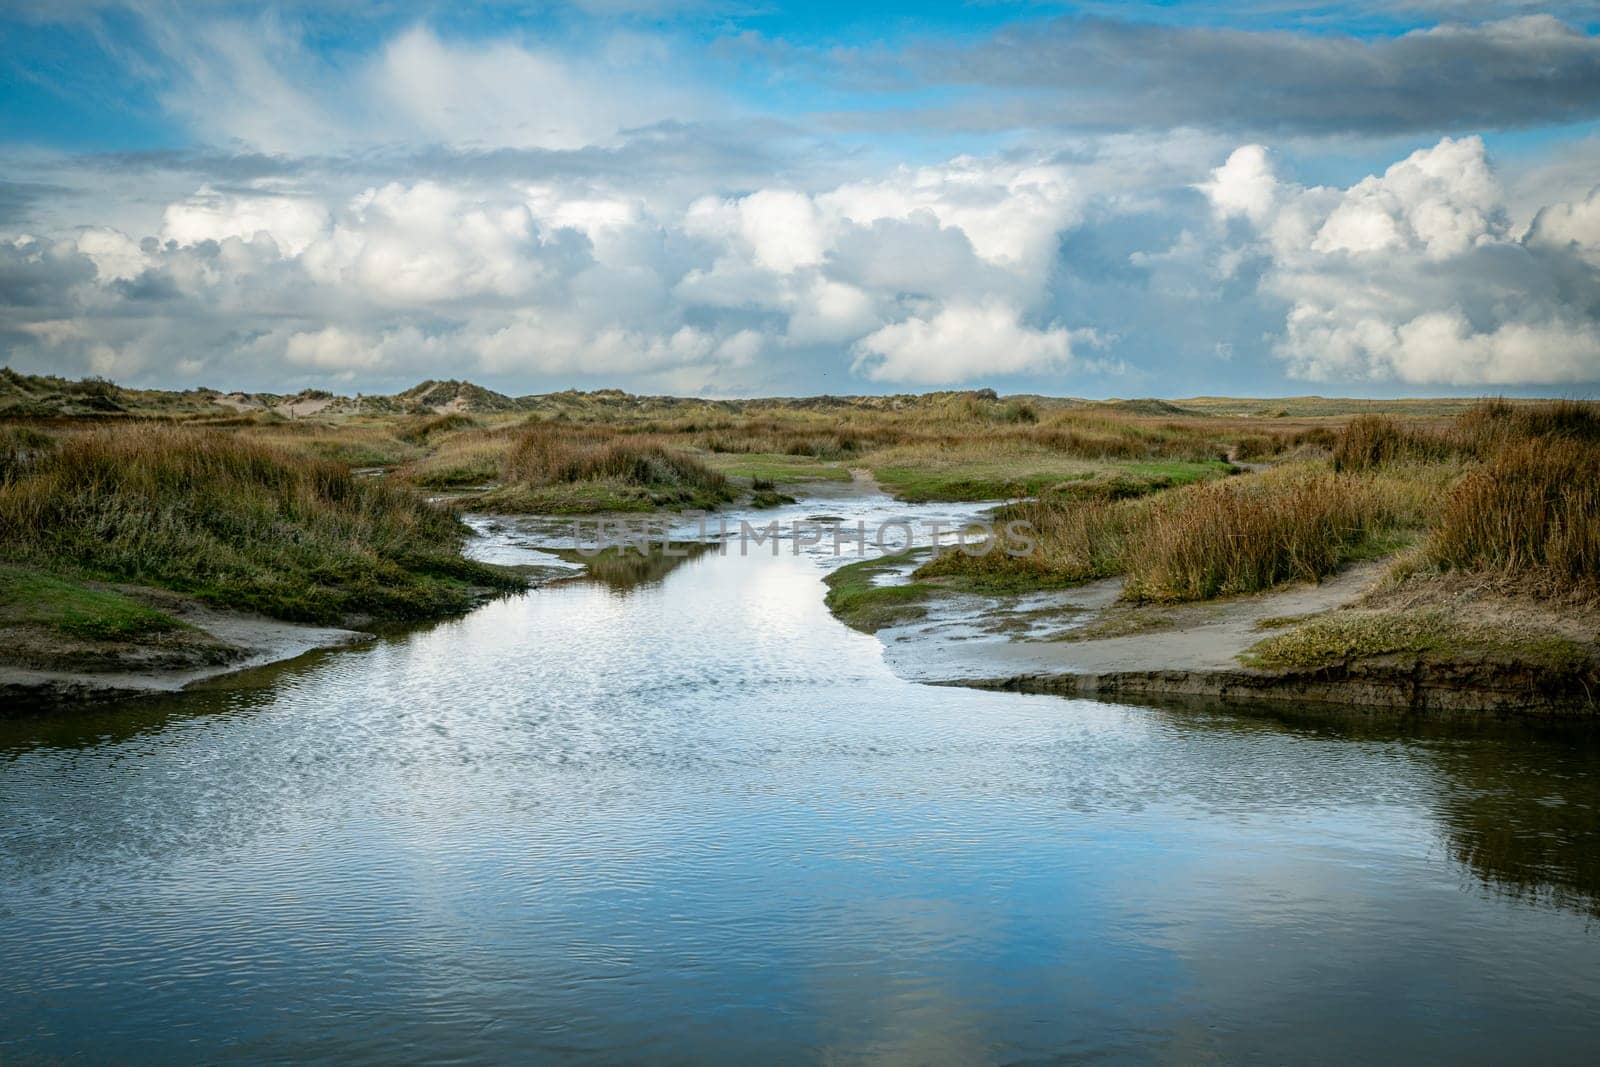 dune valley the Slufter of national park on West Frisian Waddensea island Texel, North Holland, Netherlands with dunes and water ponds